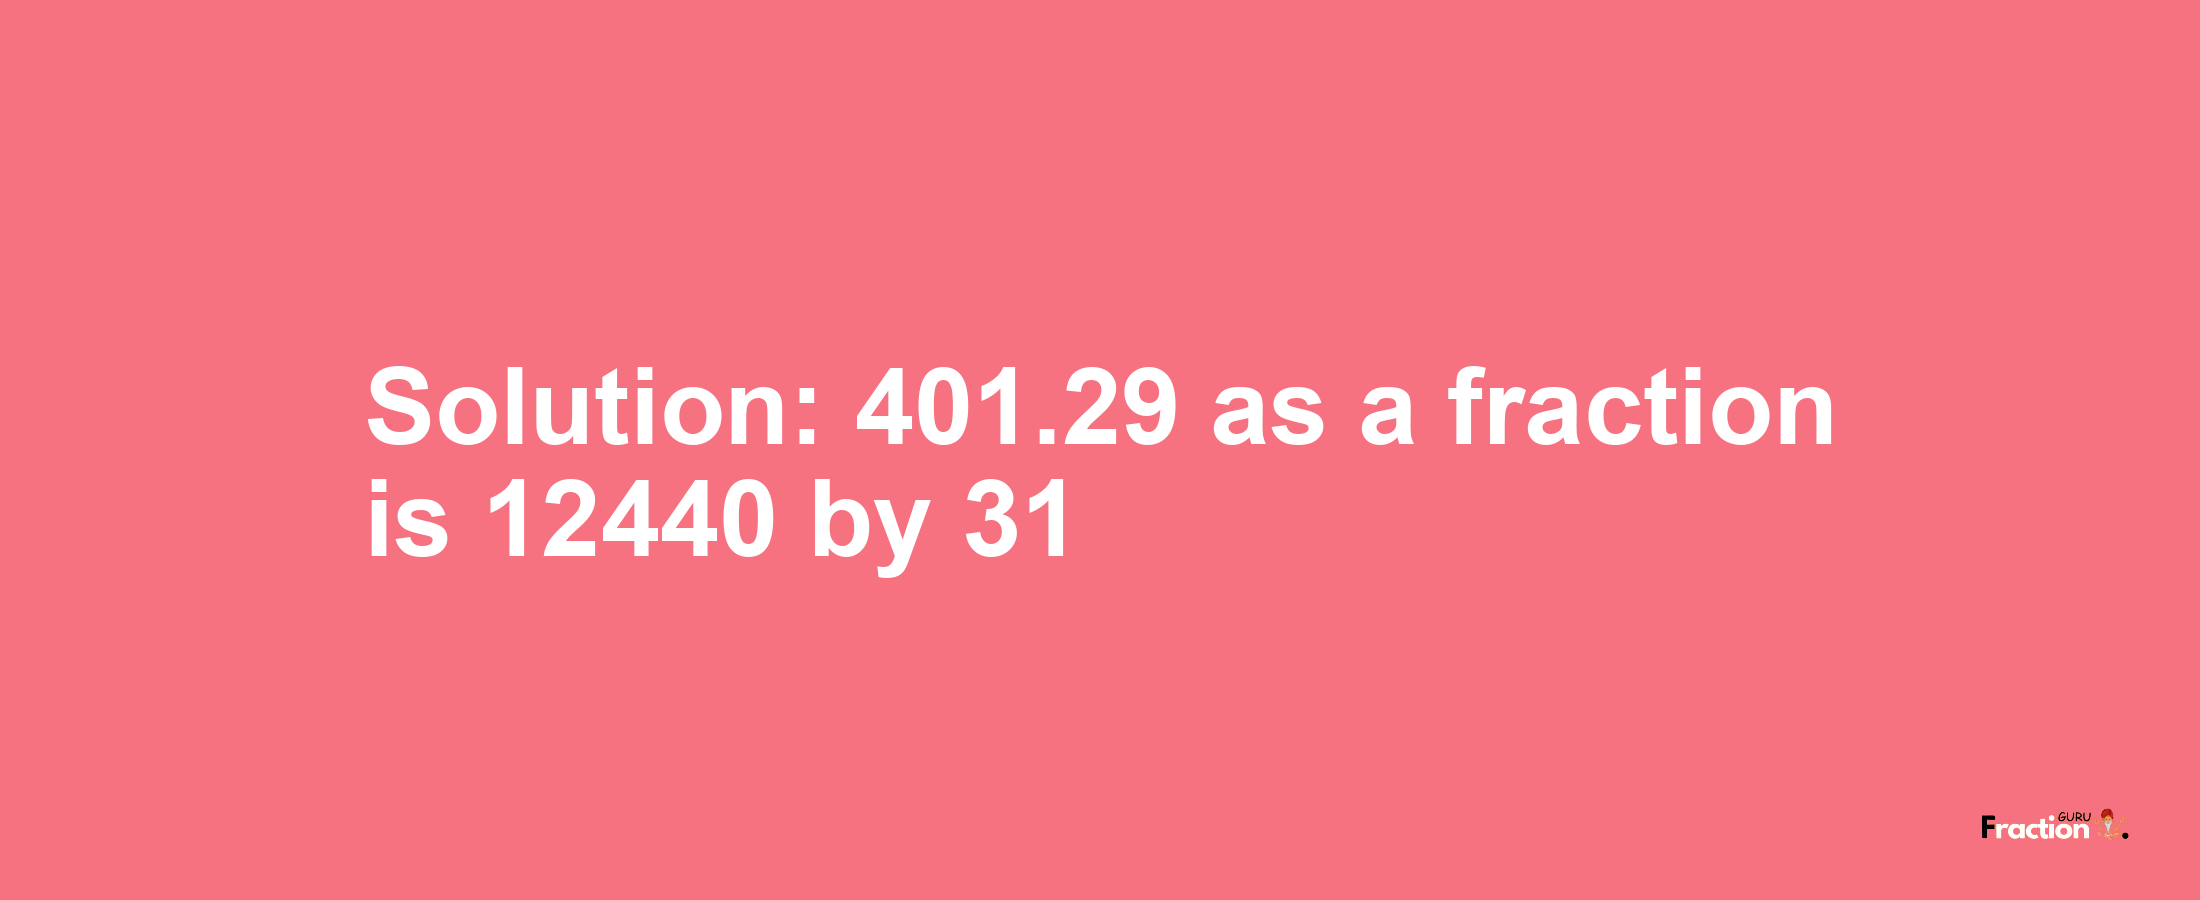 Solution:401.29 as a fraction is 12440/31